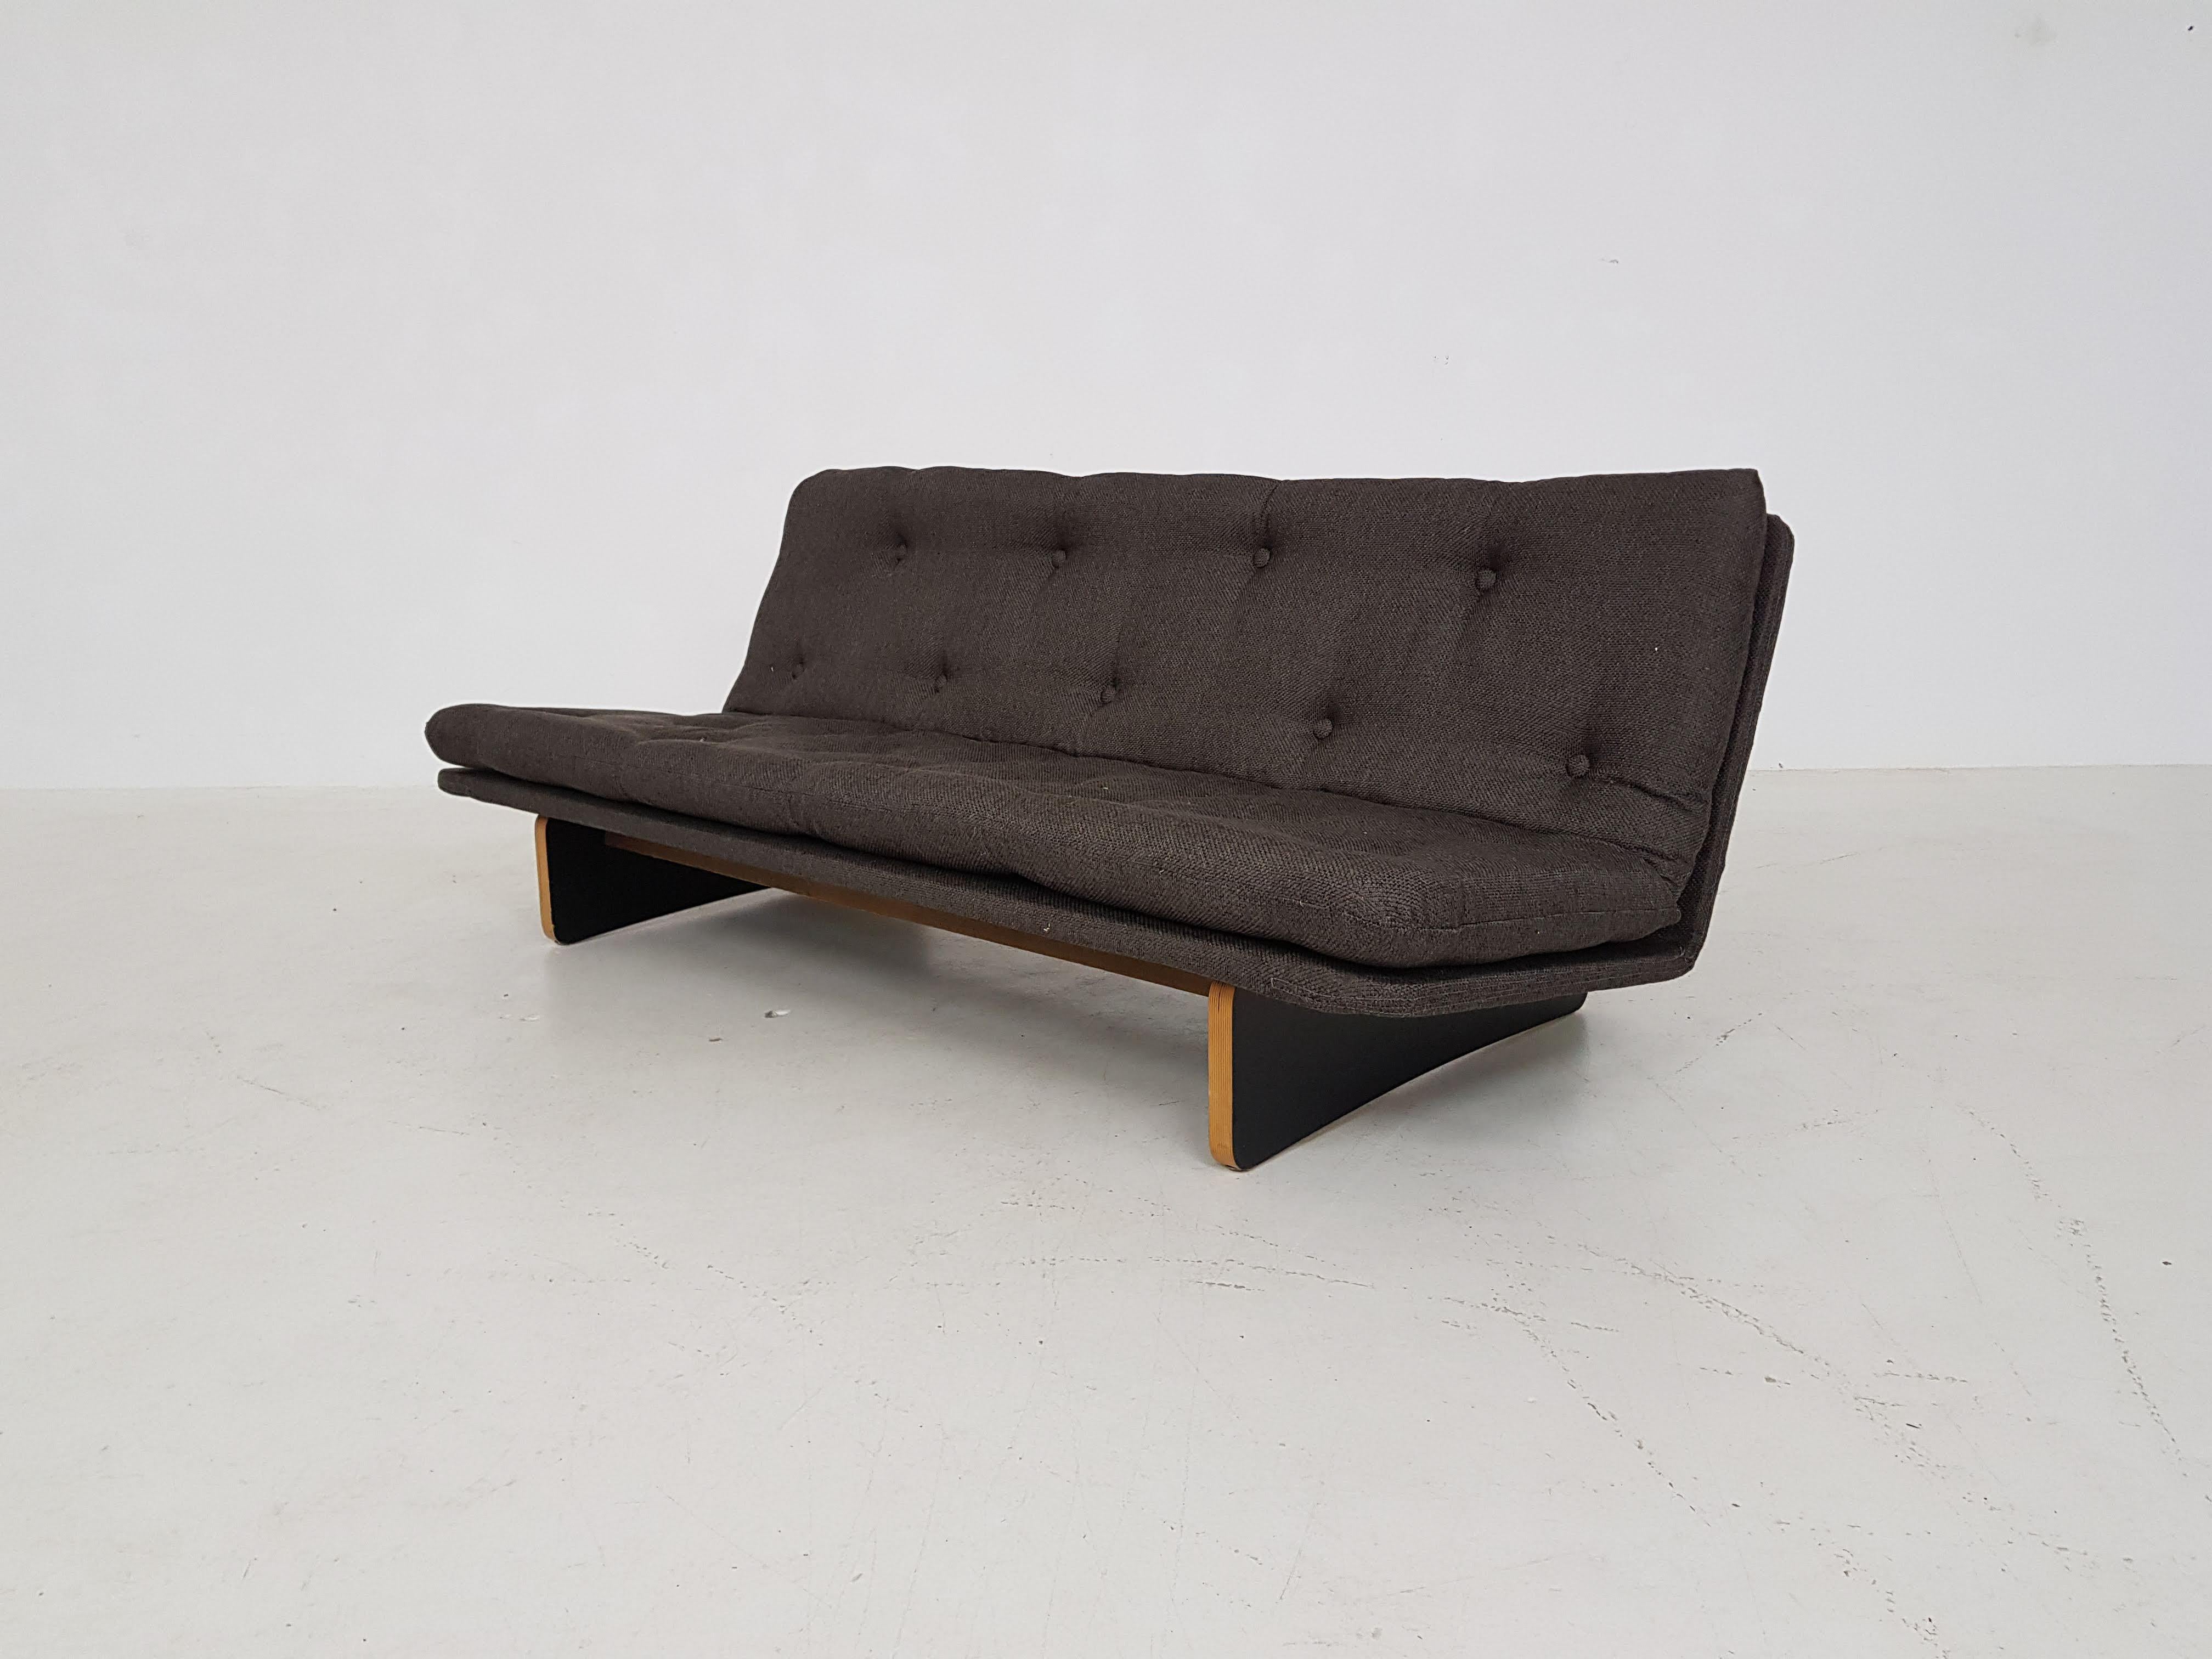 Kho liang Ie for Artifort sofa model 671 The Netherlands, 1960s.

Sofa with new dark army green-grey upholstery and wooden base.

Measures: Length 175 cm
Depth 80 cm; seating 55 cm
Height 70 cm; seating 35 cm.